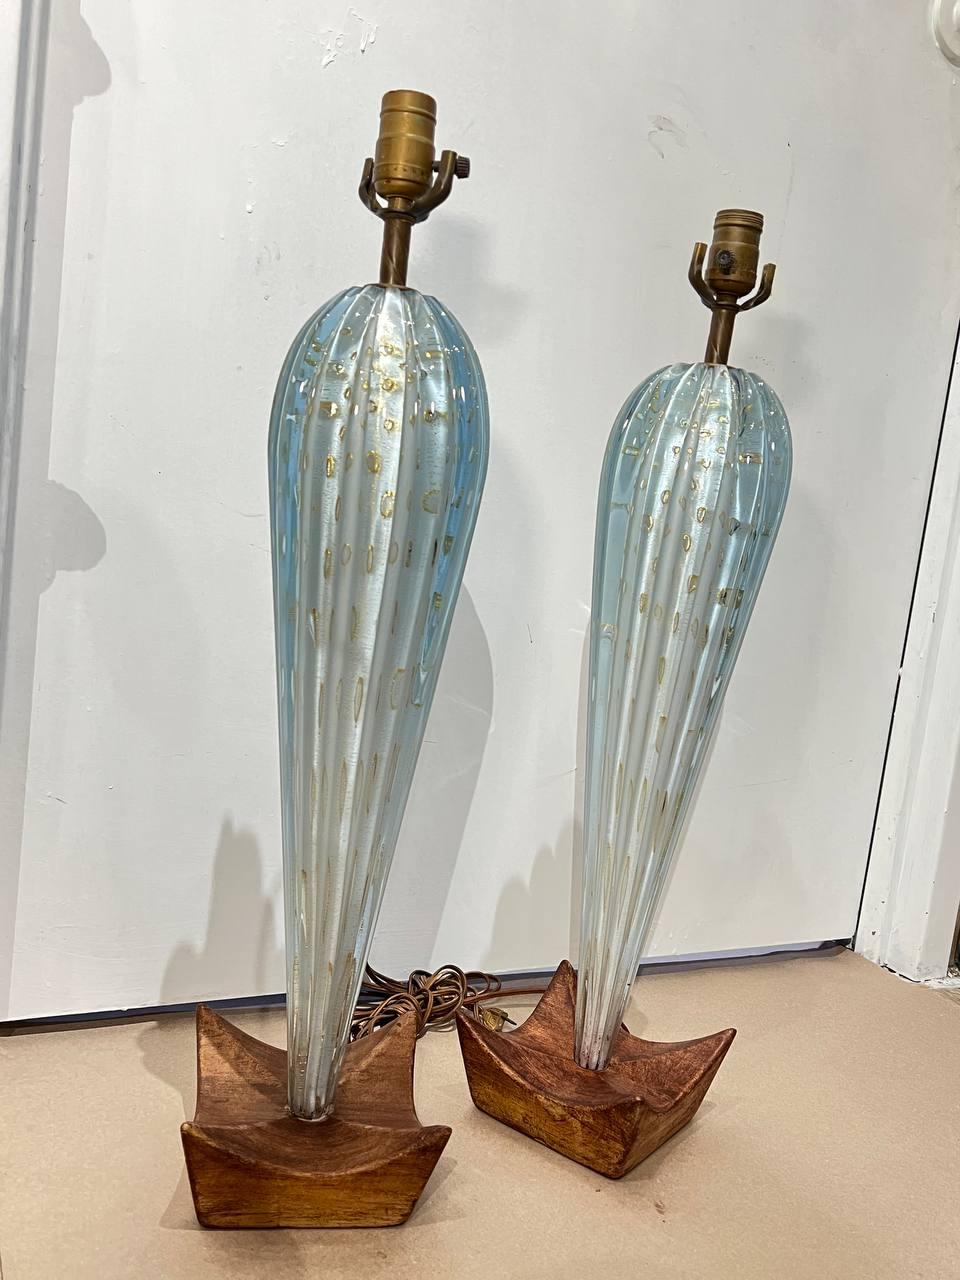 A circa 1940's Murano Glass bright blue and gold table lamps with unusual wooden base